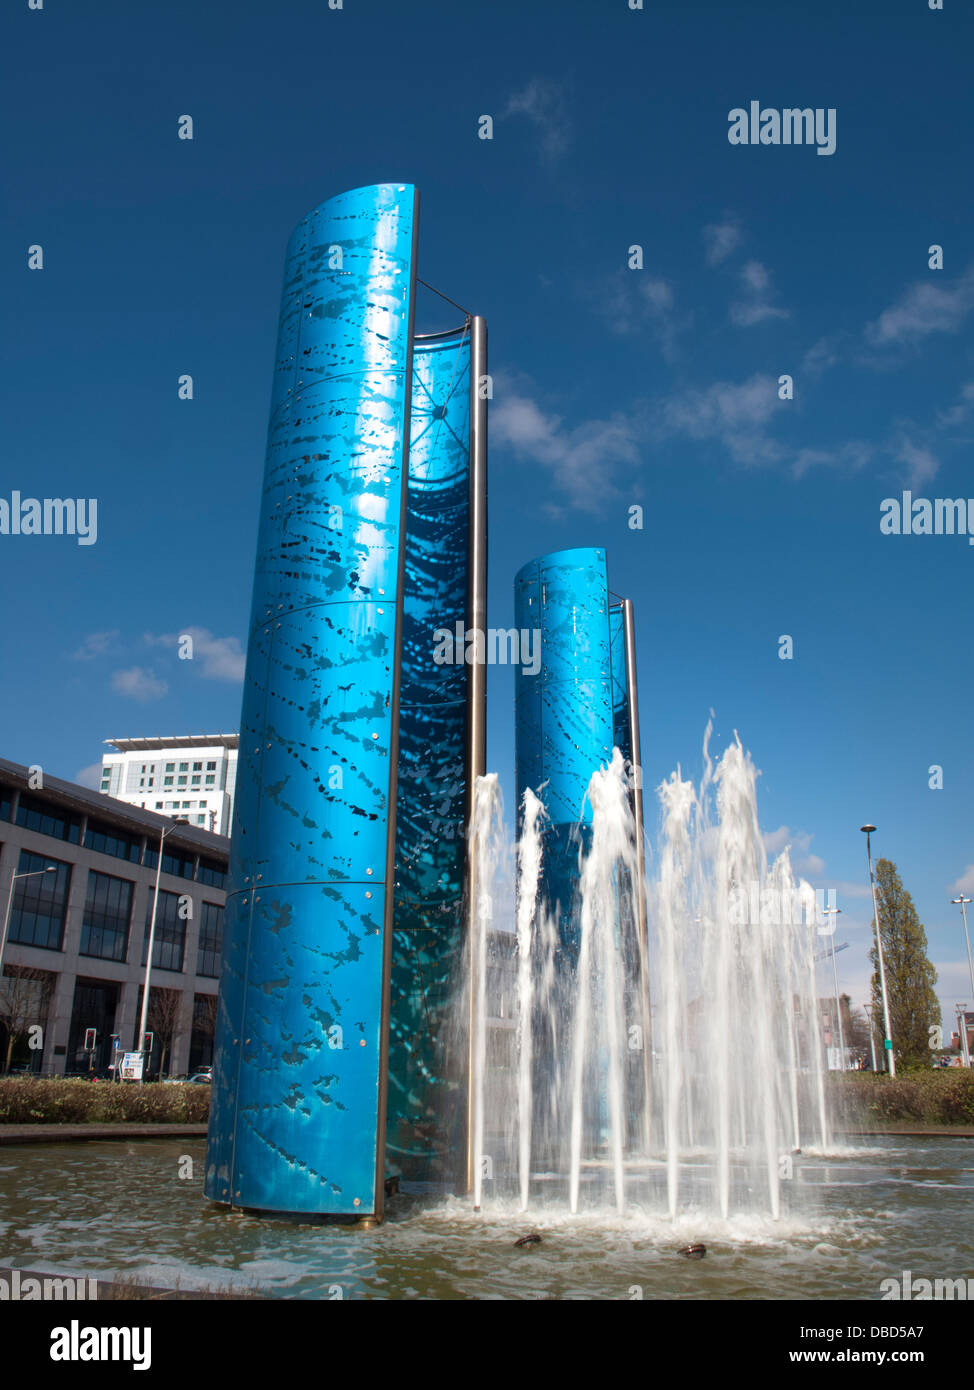 Fountains in Callaghan Square Cardiff Stock Photo